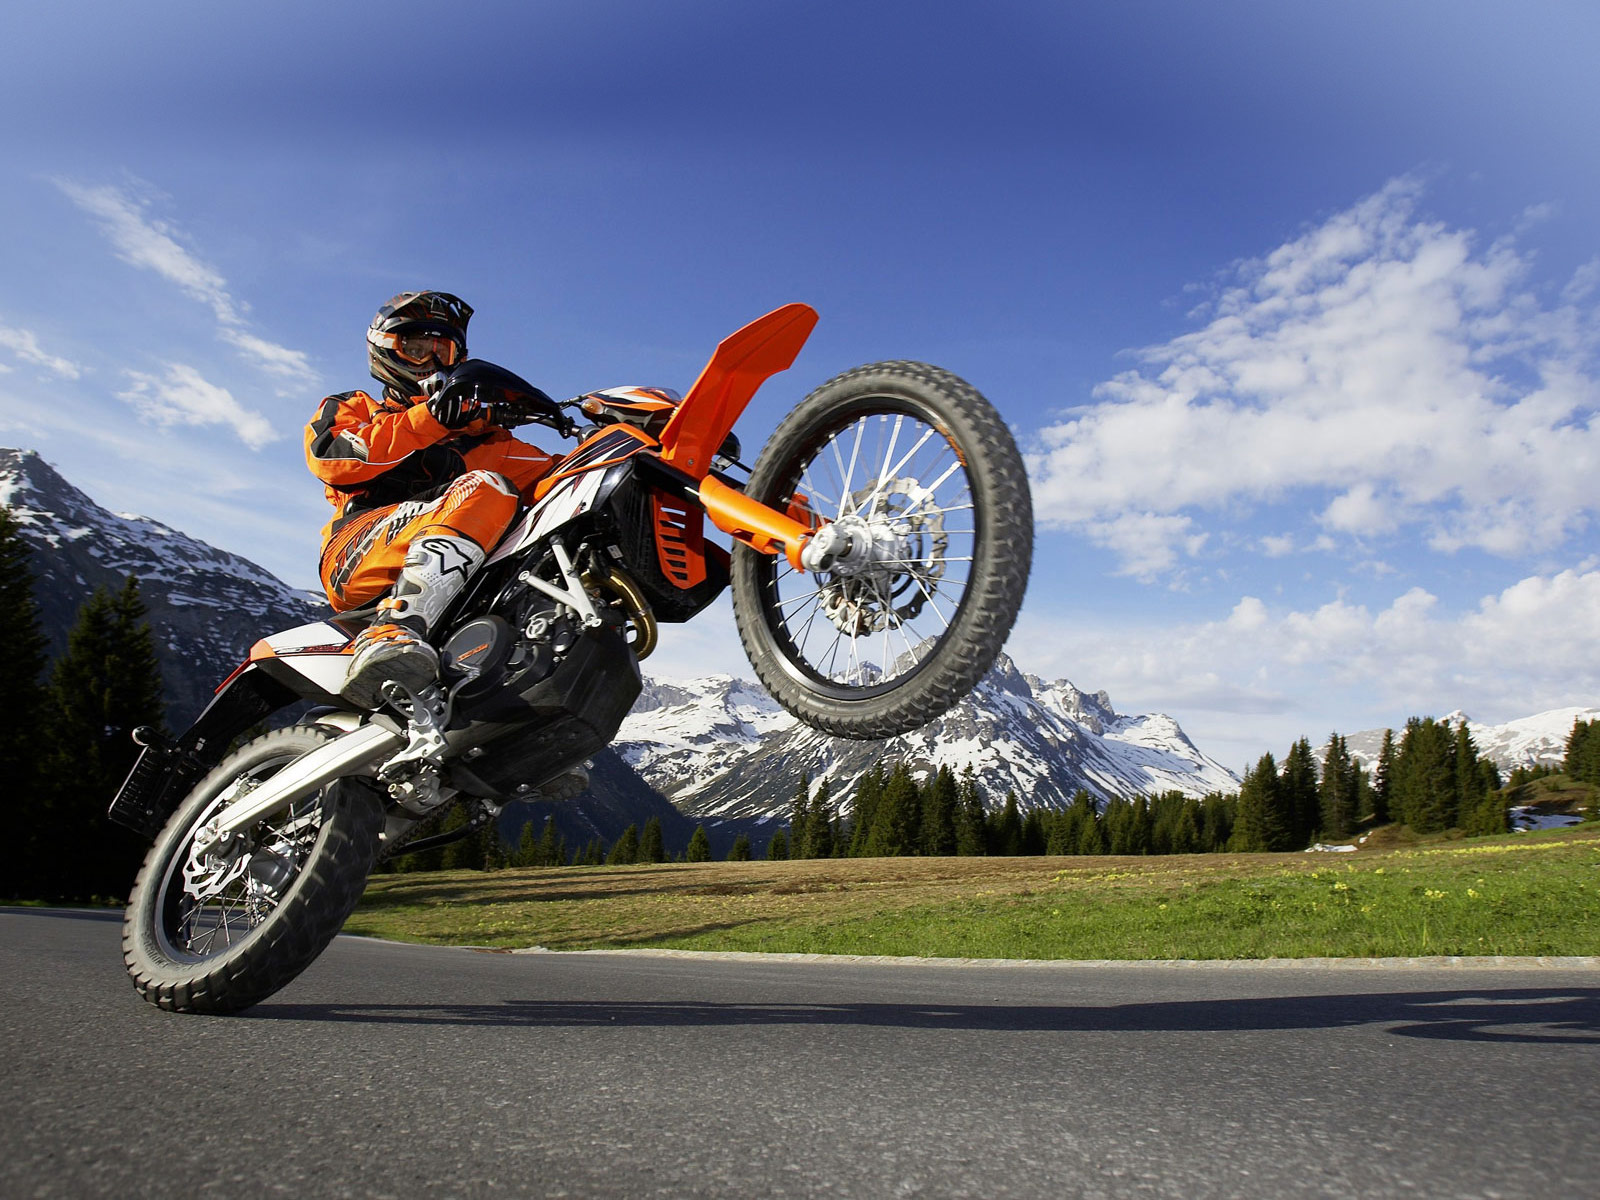 KTM Supermoto Action Wallpaper For Android #7953 Wallpaper | High ...